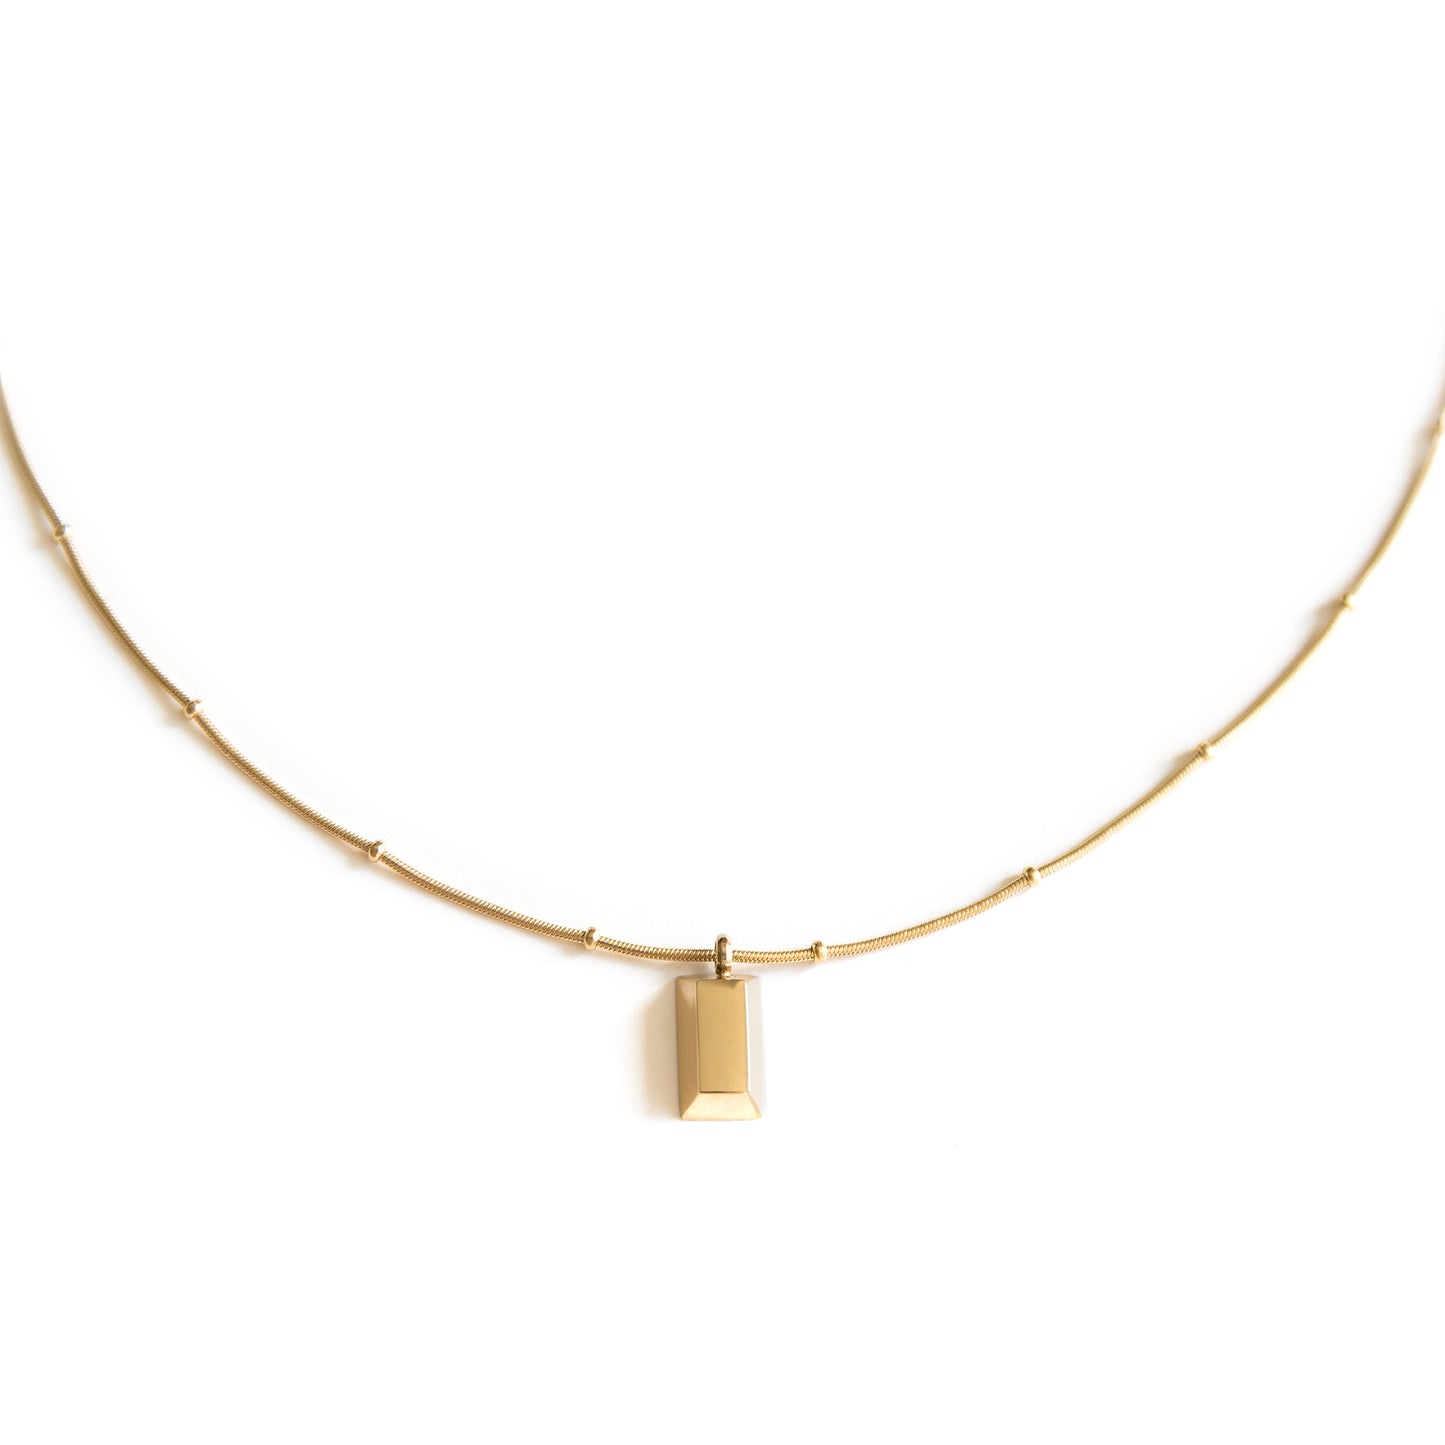 Arvo gold brick on a gold chain necklace on a white background